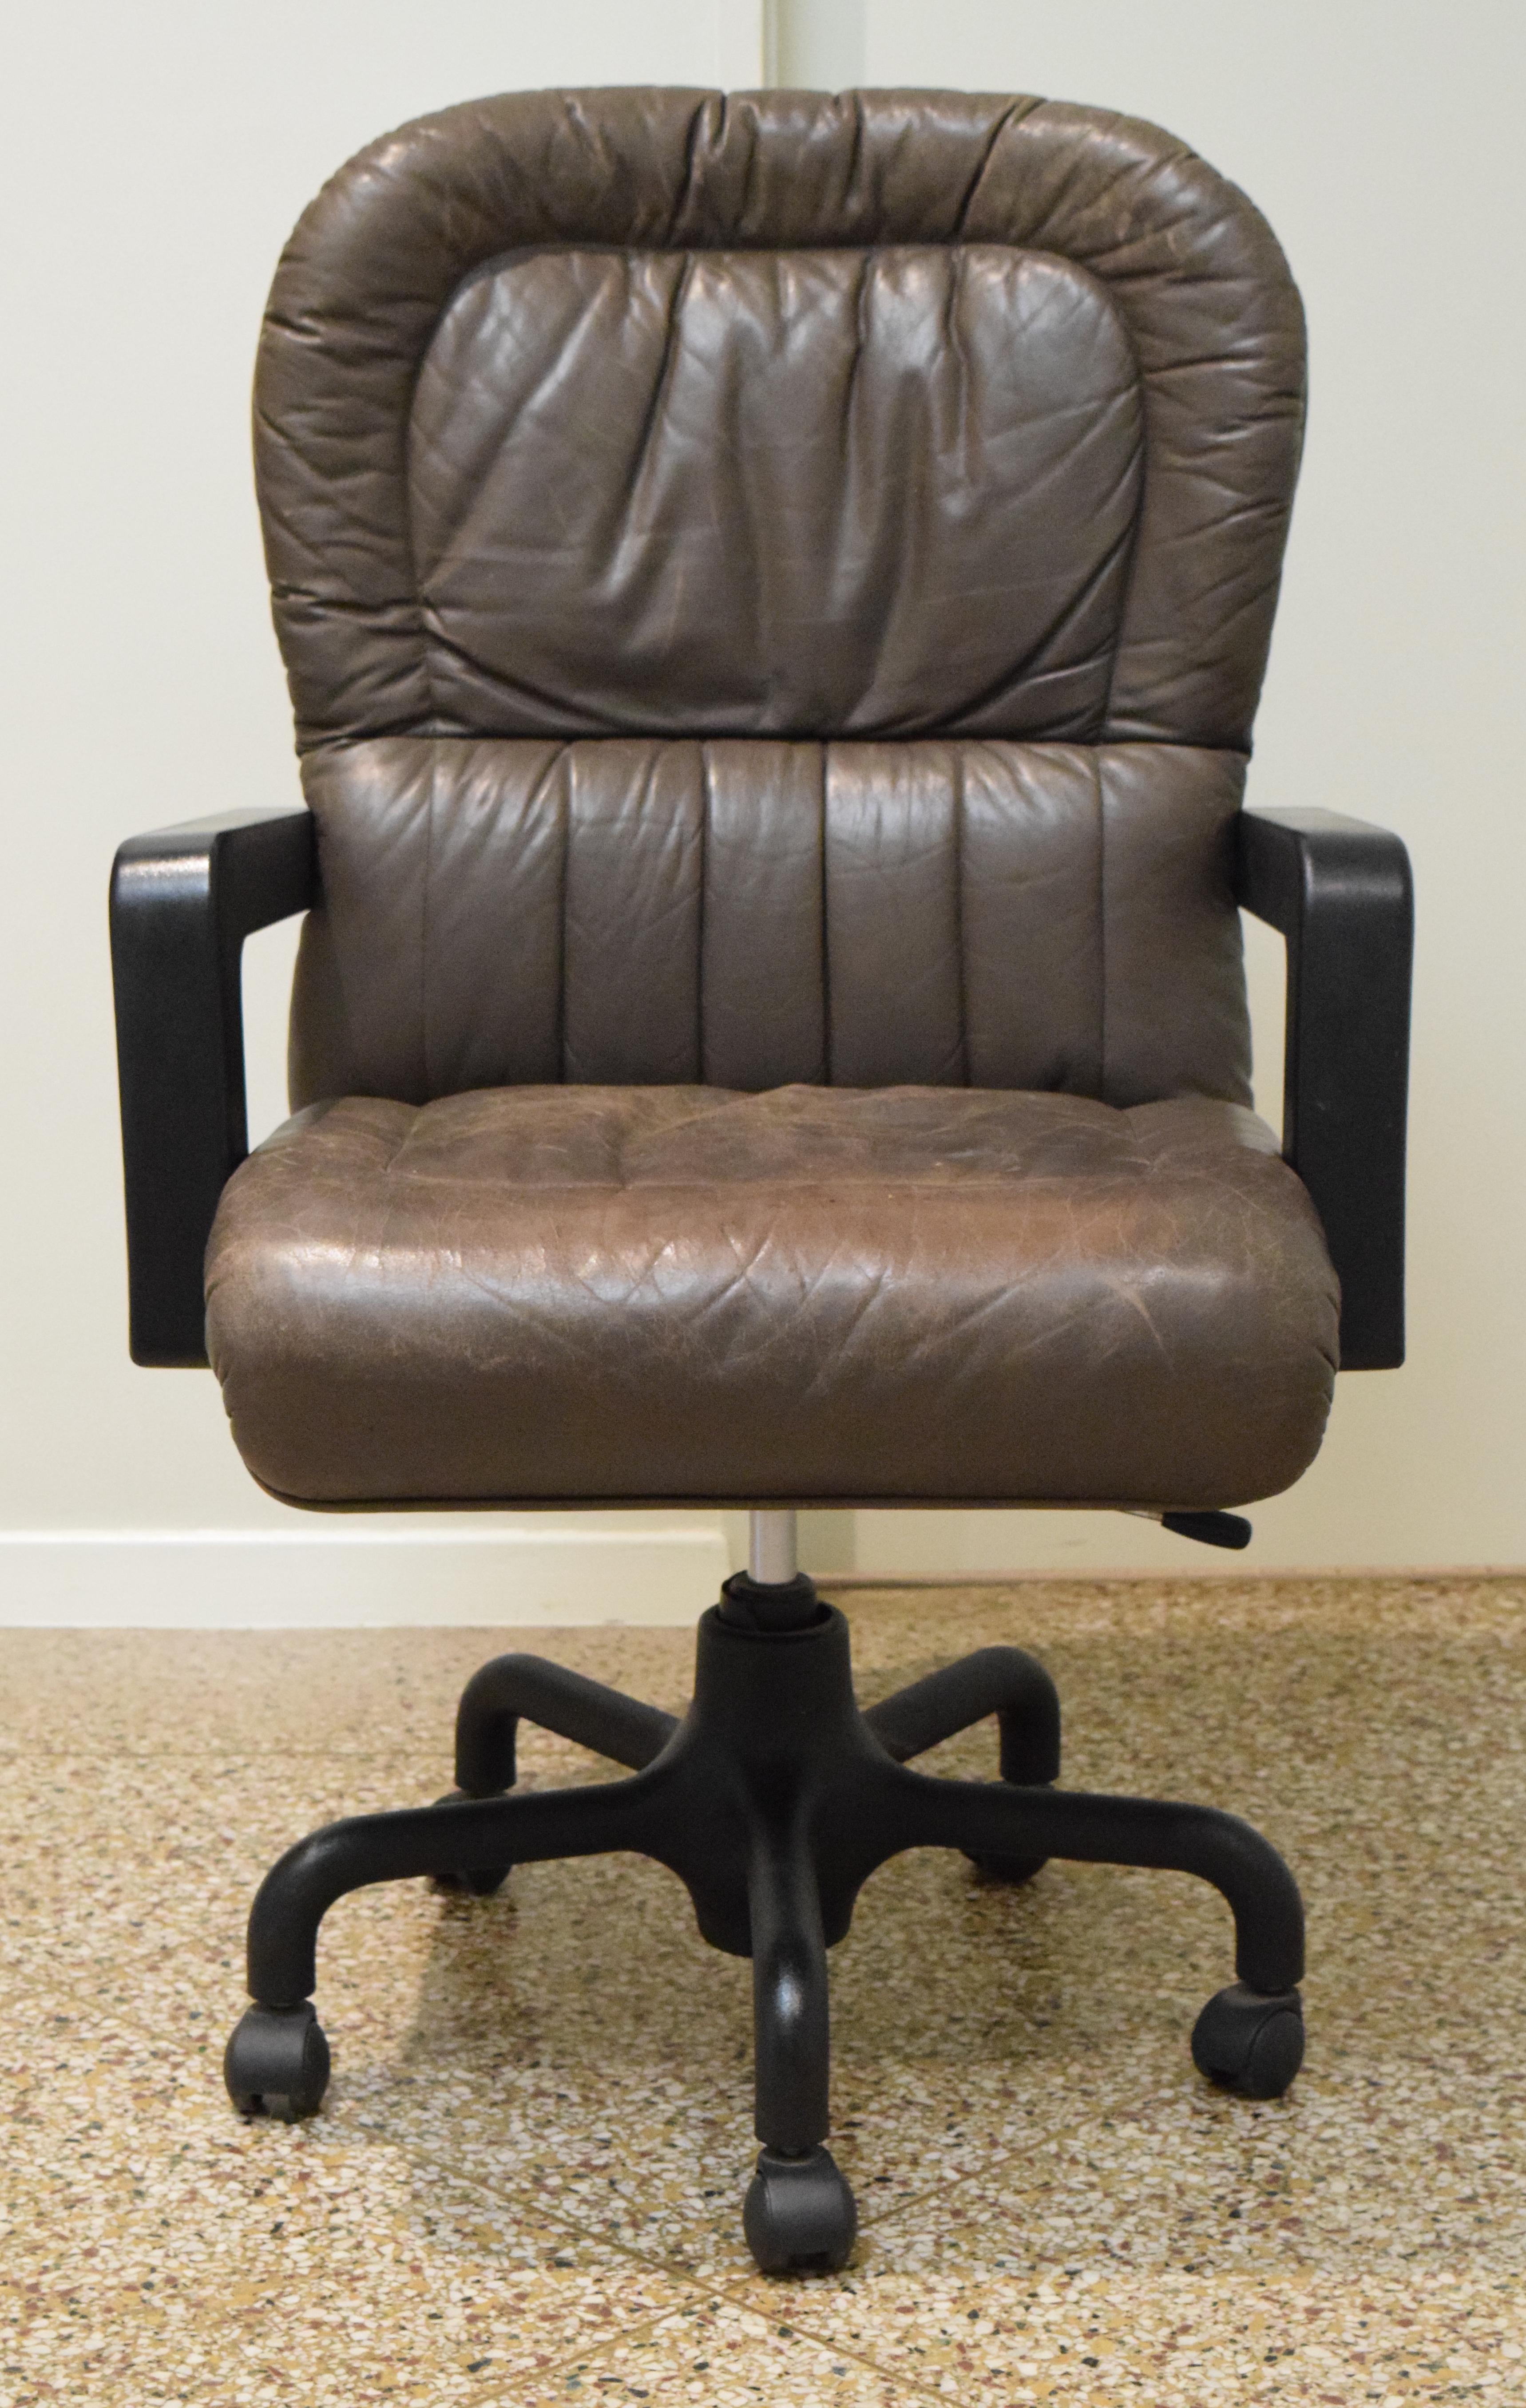 Store closing-- last day is 7/31. Offers welcome! Vintage leather office chair by Guido Faleschini at i4 Mariani for Pace collection. Exceptionally comfortable. Height is adjustable.